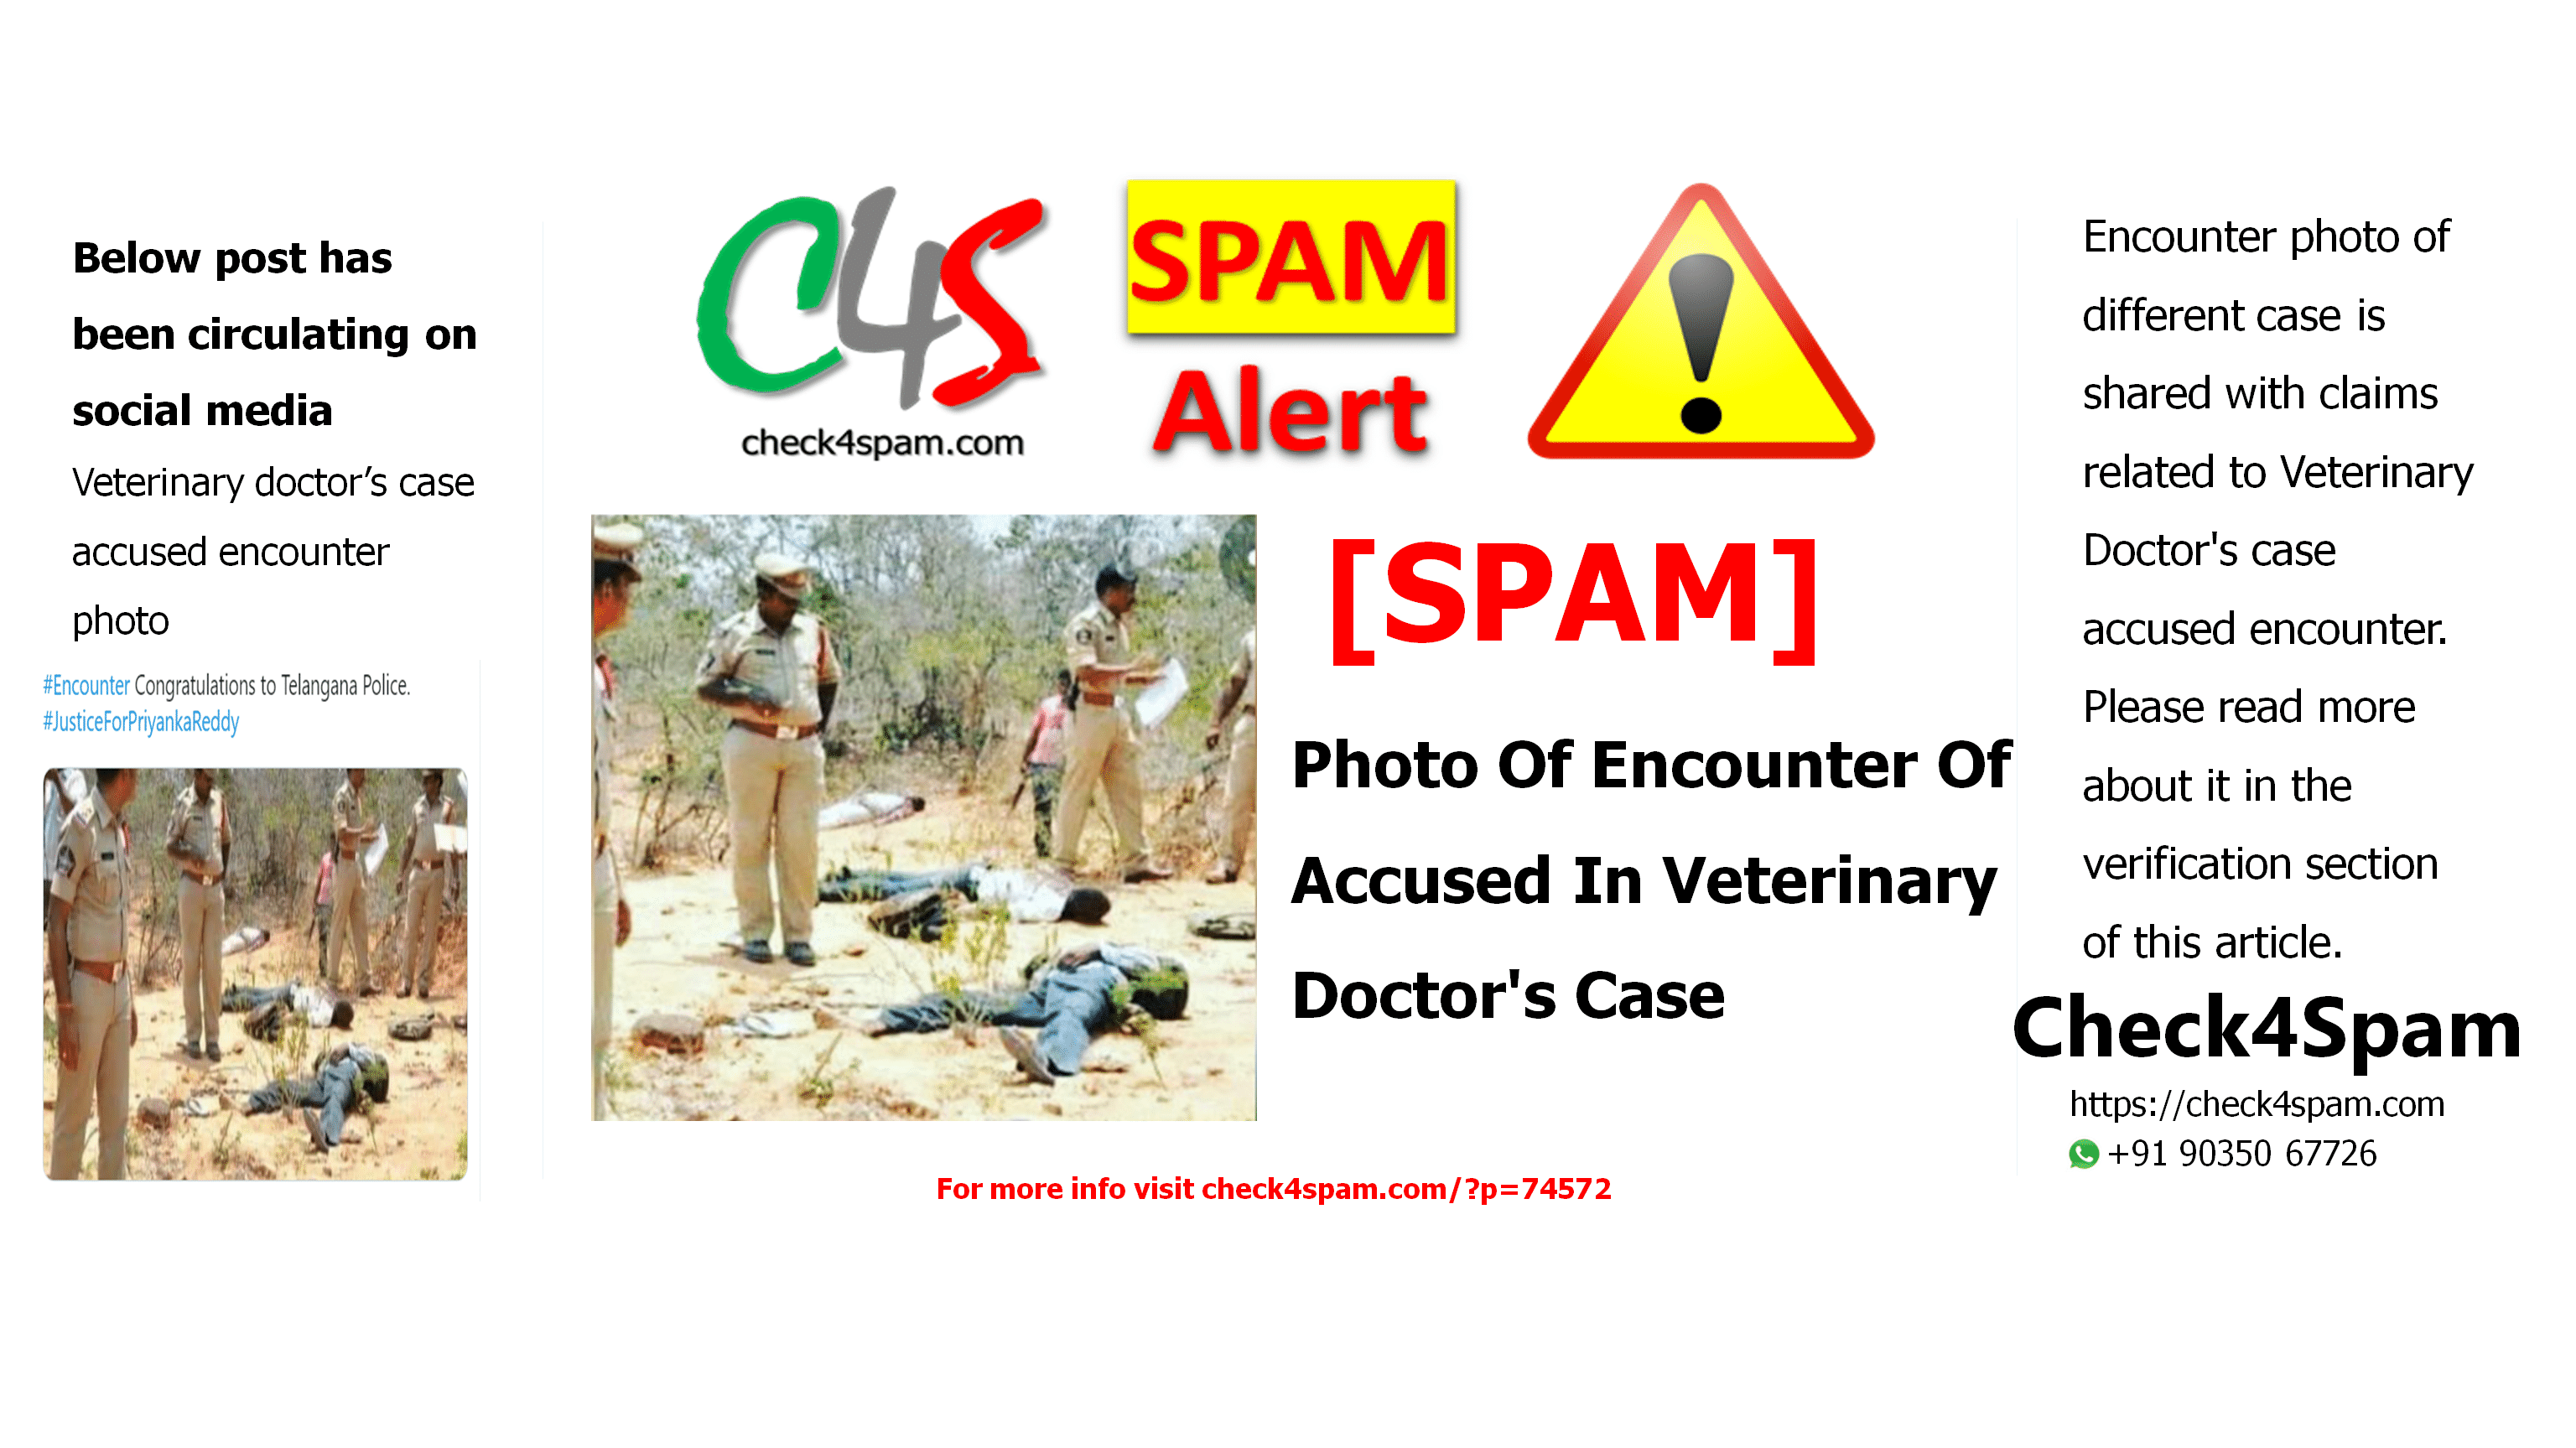 Photo Of Encounter Of Accused In Veterinary Doctor's Case